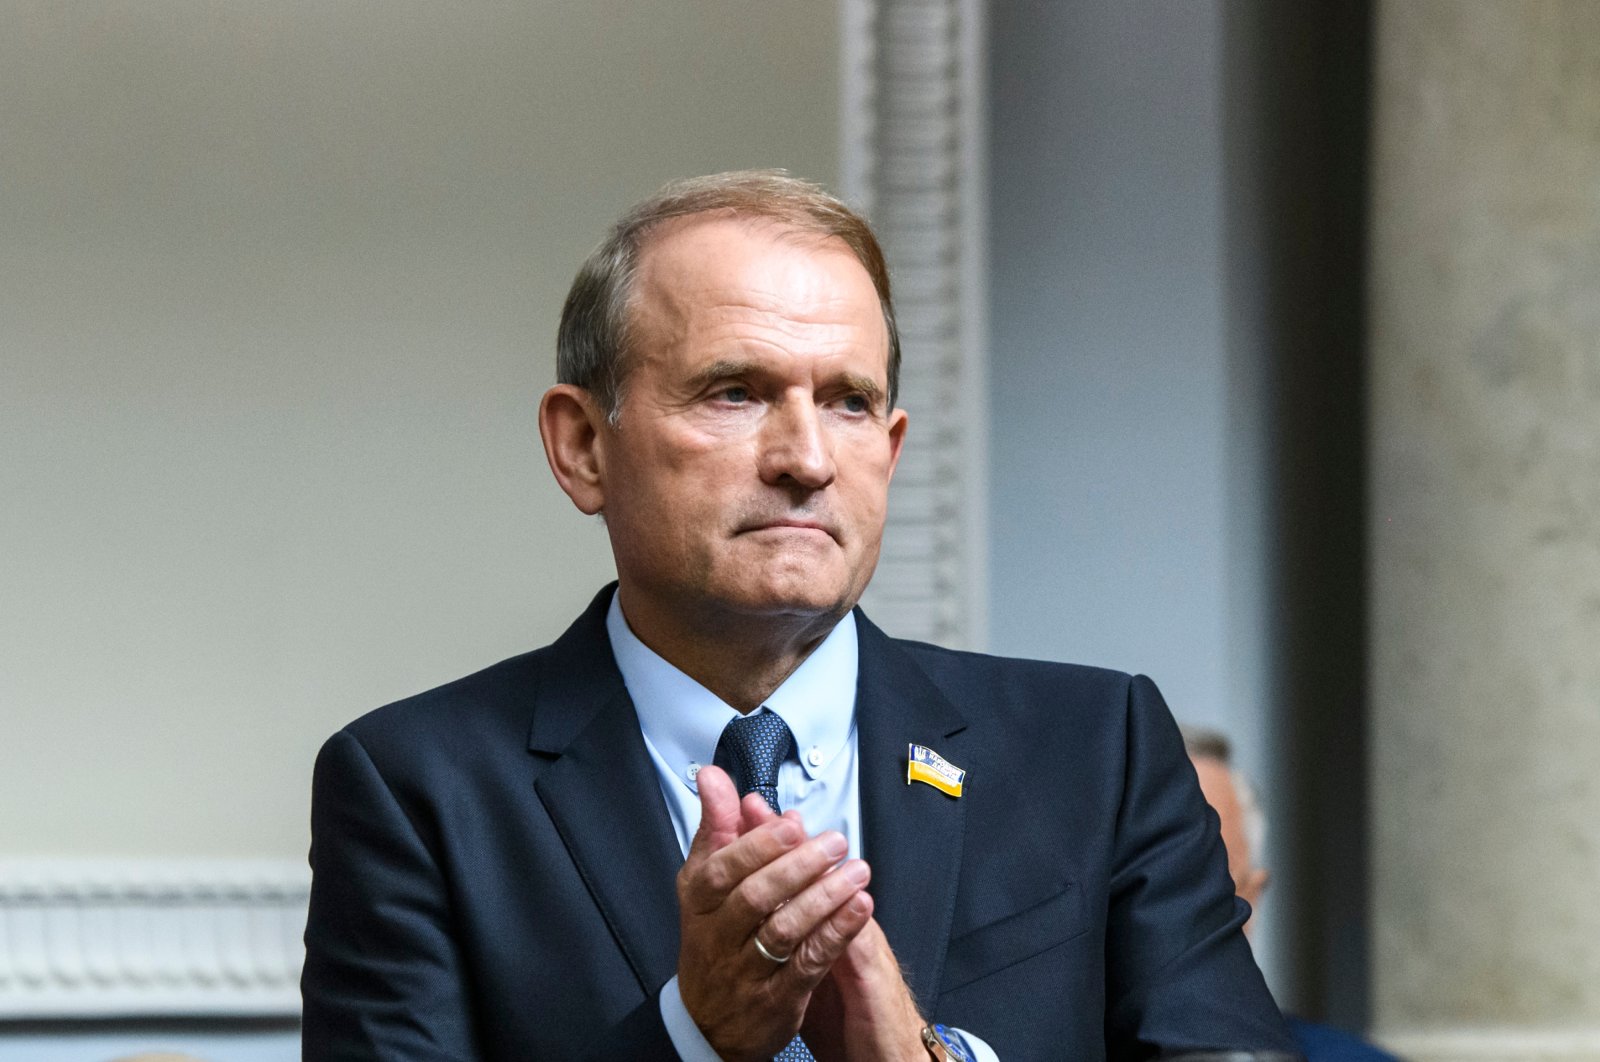 The leader of the Opposition Platform – For Life party, Viktor Medvedchuk, during a session of the Ukrainian parliament in Kyiv, Ukraine, Aug. 29, 2019. (Shutterstock)